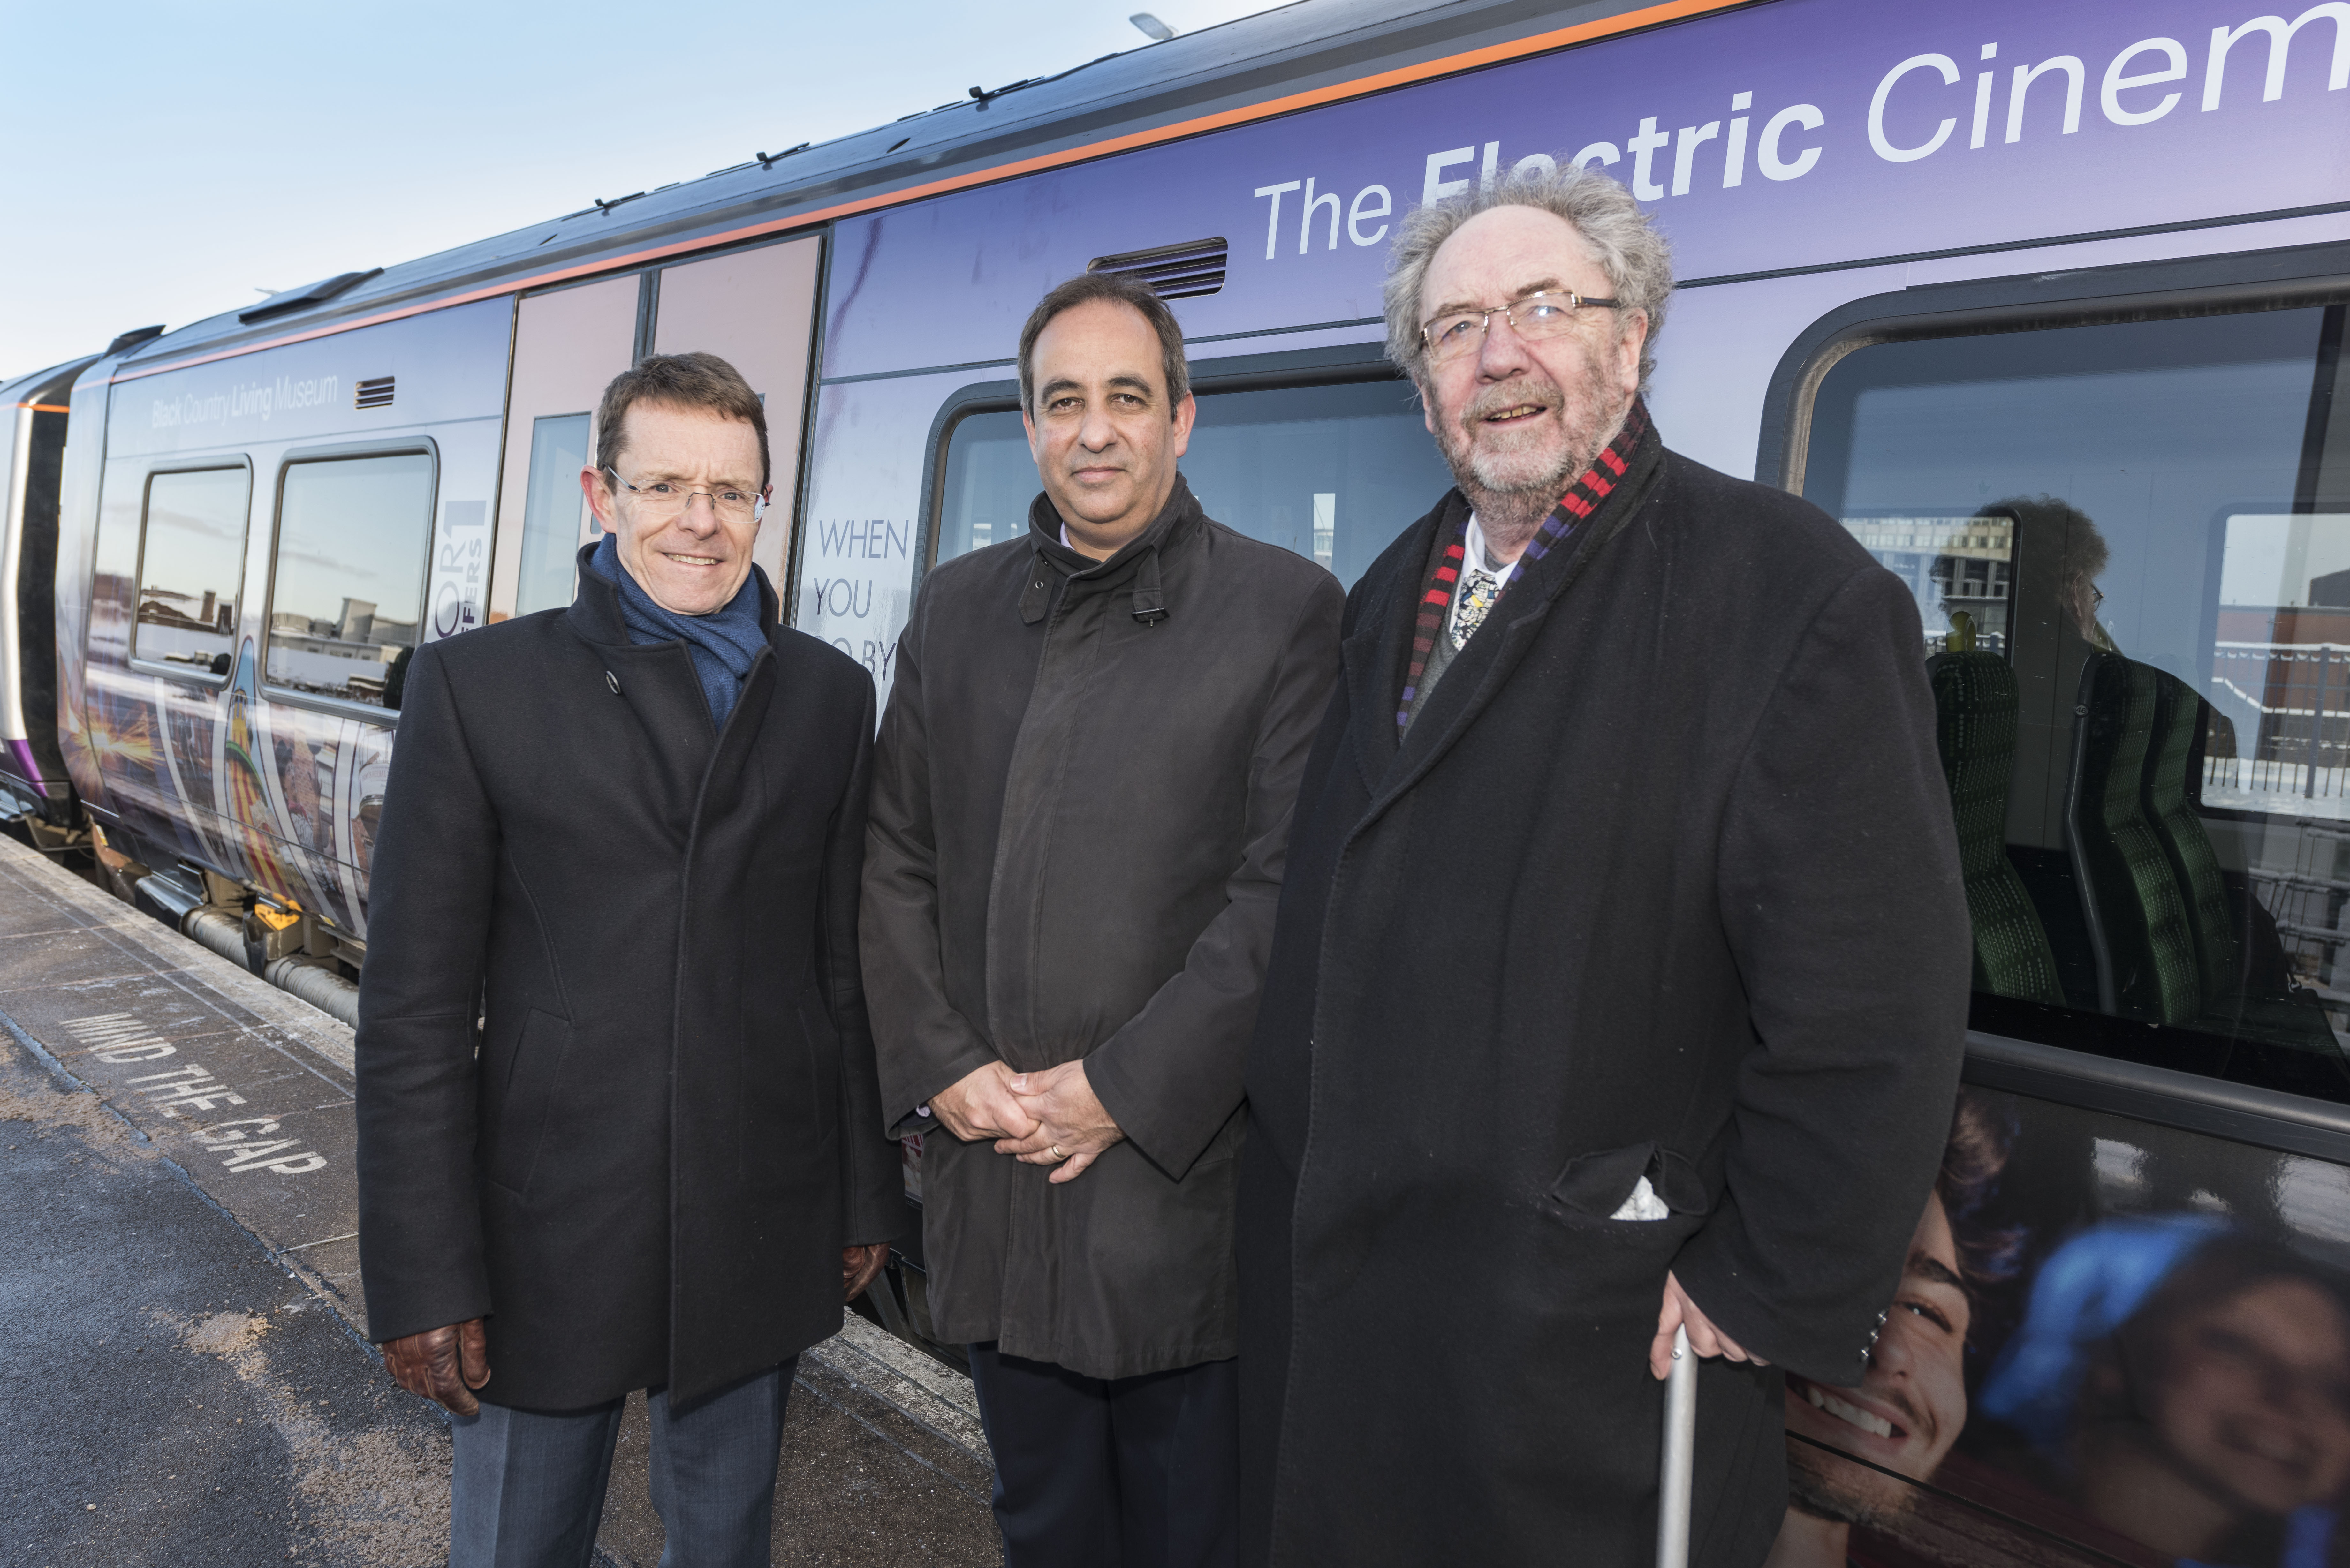 West Midlands Mayor Andy Street, Jan Caudhry-van der Velde, managing director of West Midlands Trains and Cllr Roger Lawrence, chair of the West Midlands Rail Executive